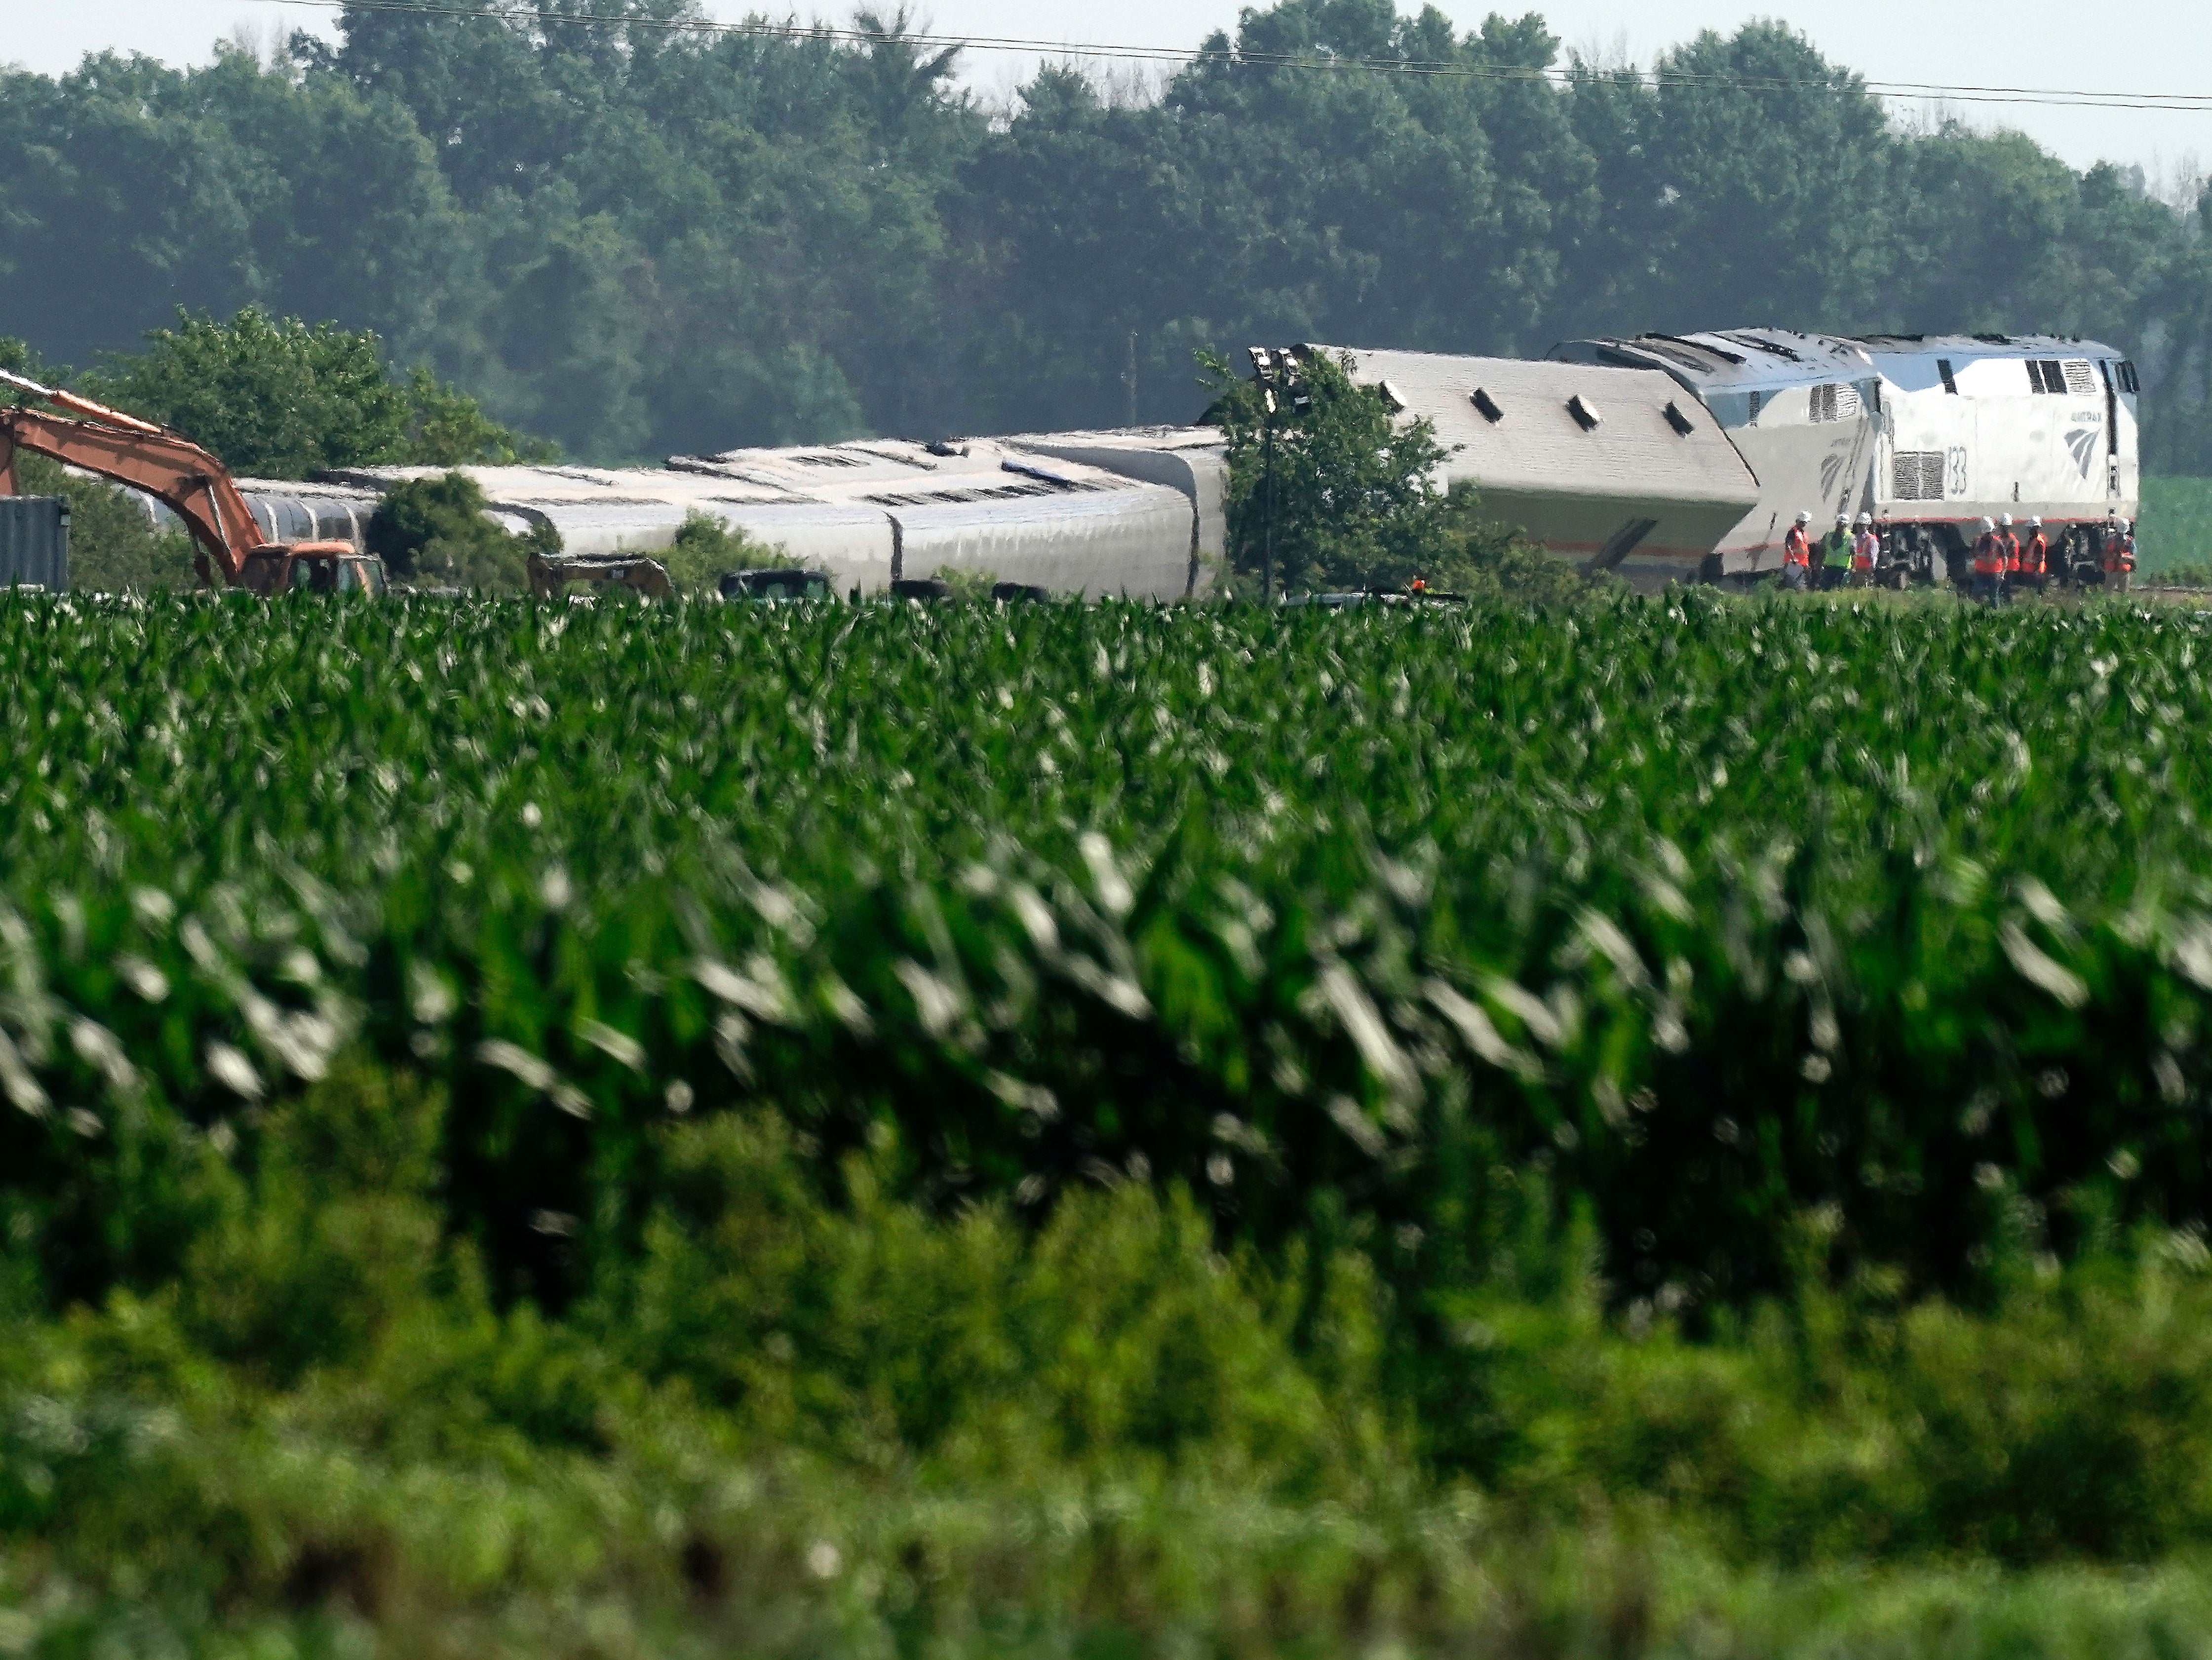 Federal investigators arrived at the scene of the Amtrak derailment in Missouri on Tuesday